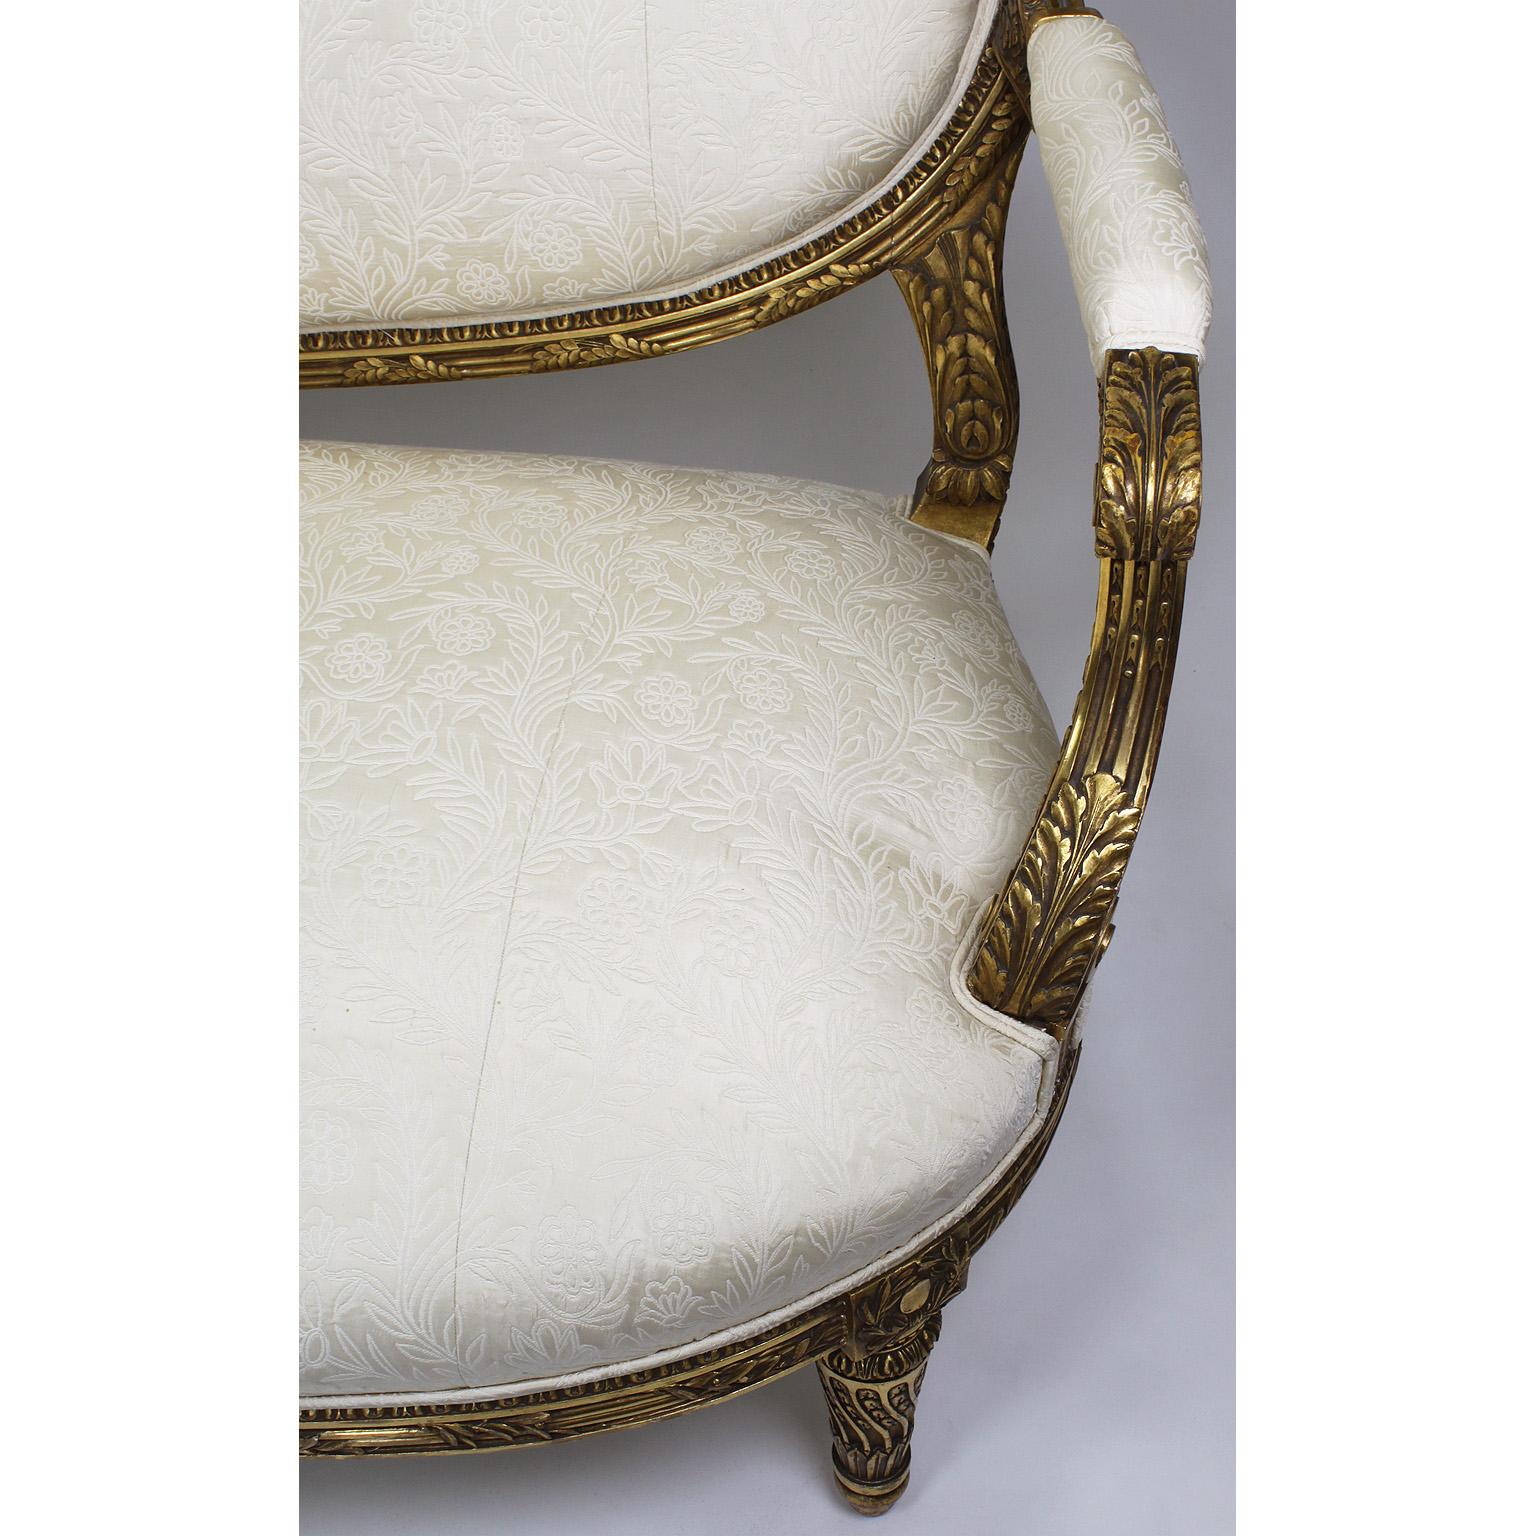 French 19th-20th Century Louis XVI Style Giltwood Carved Settee, François Linke For Sale 2